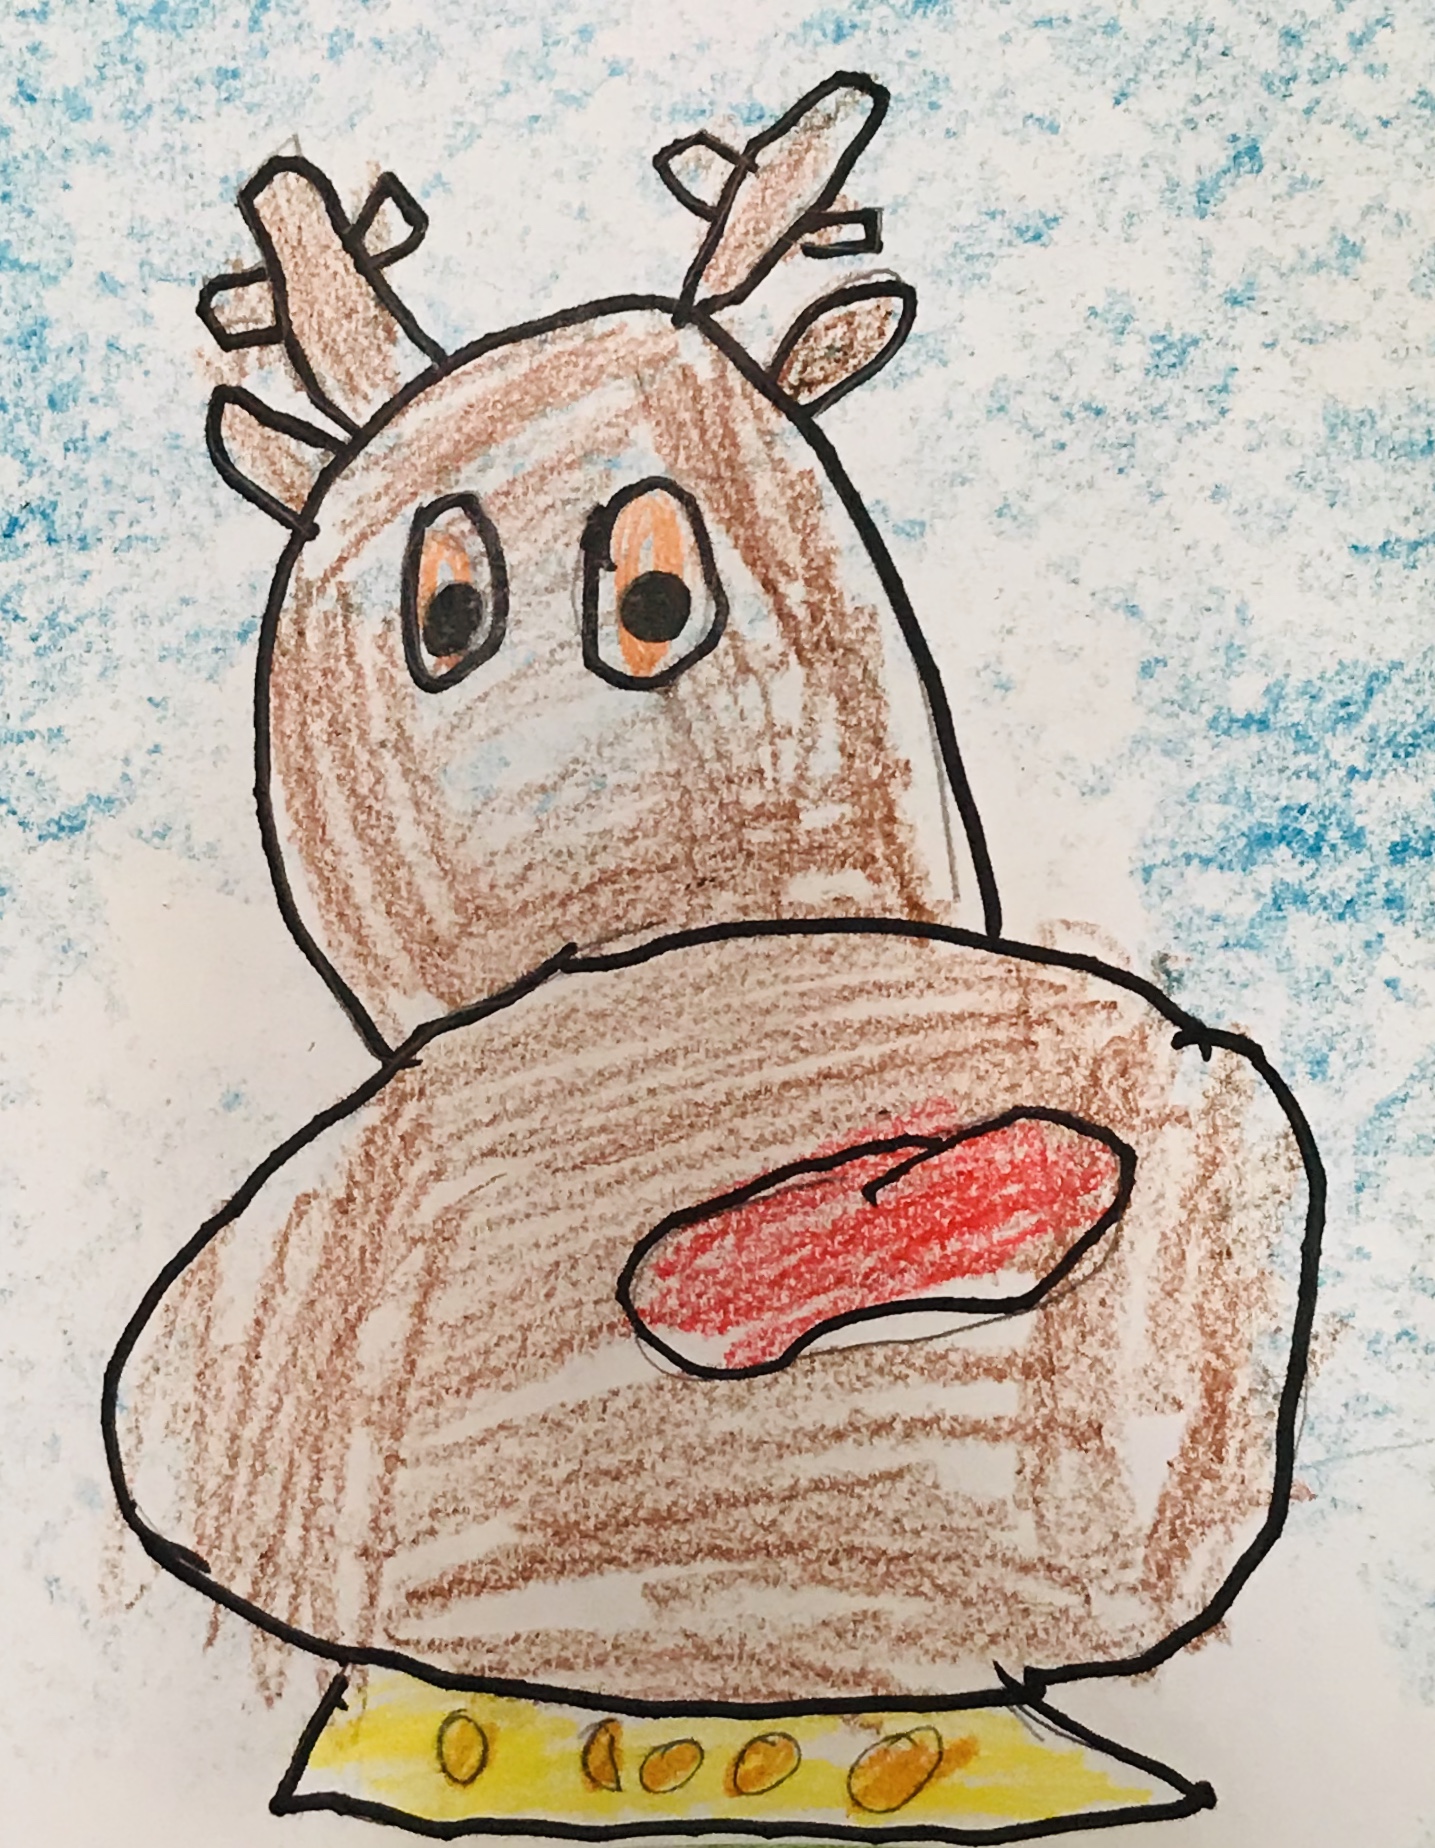 Drawn reindeer with blue background